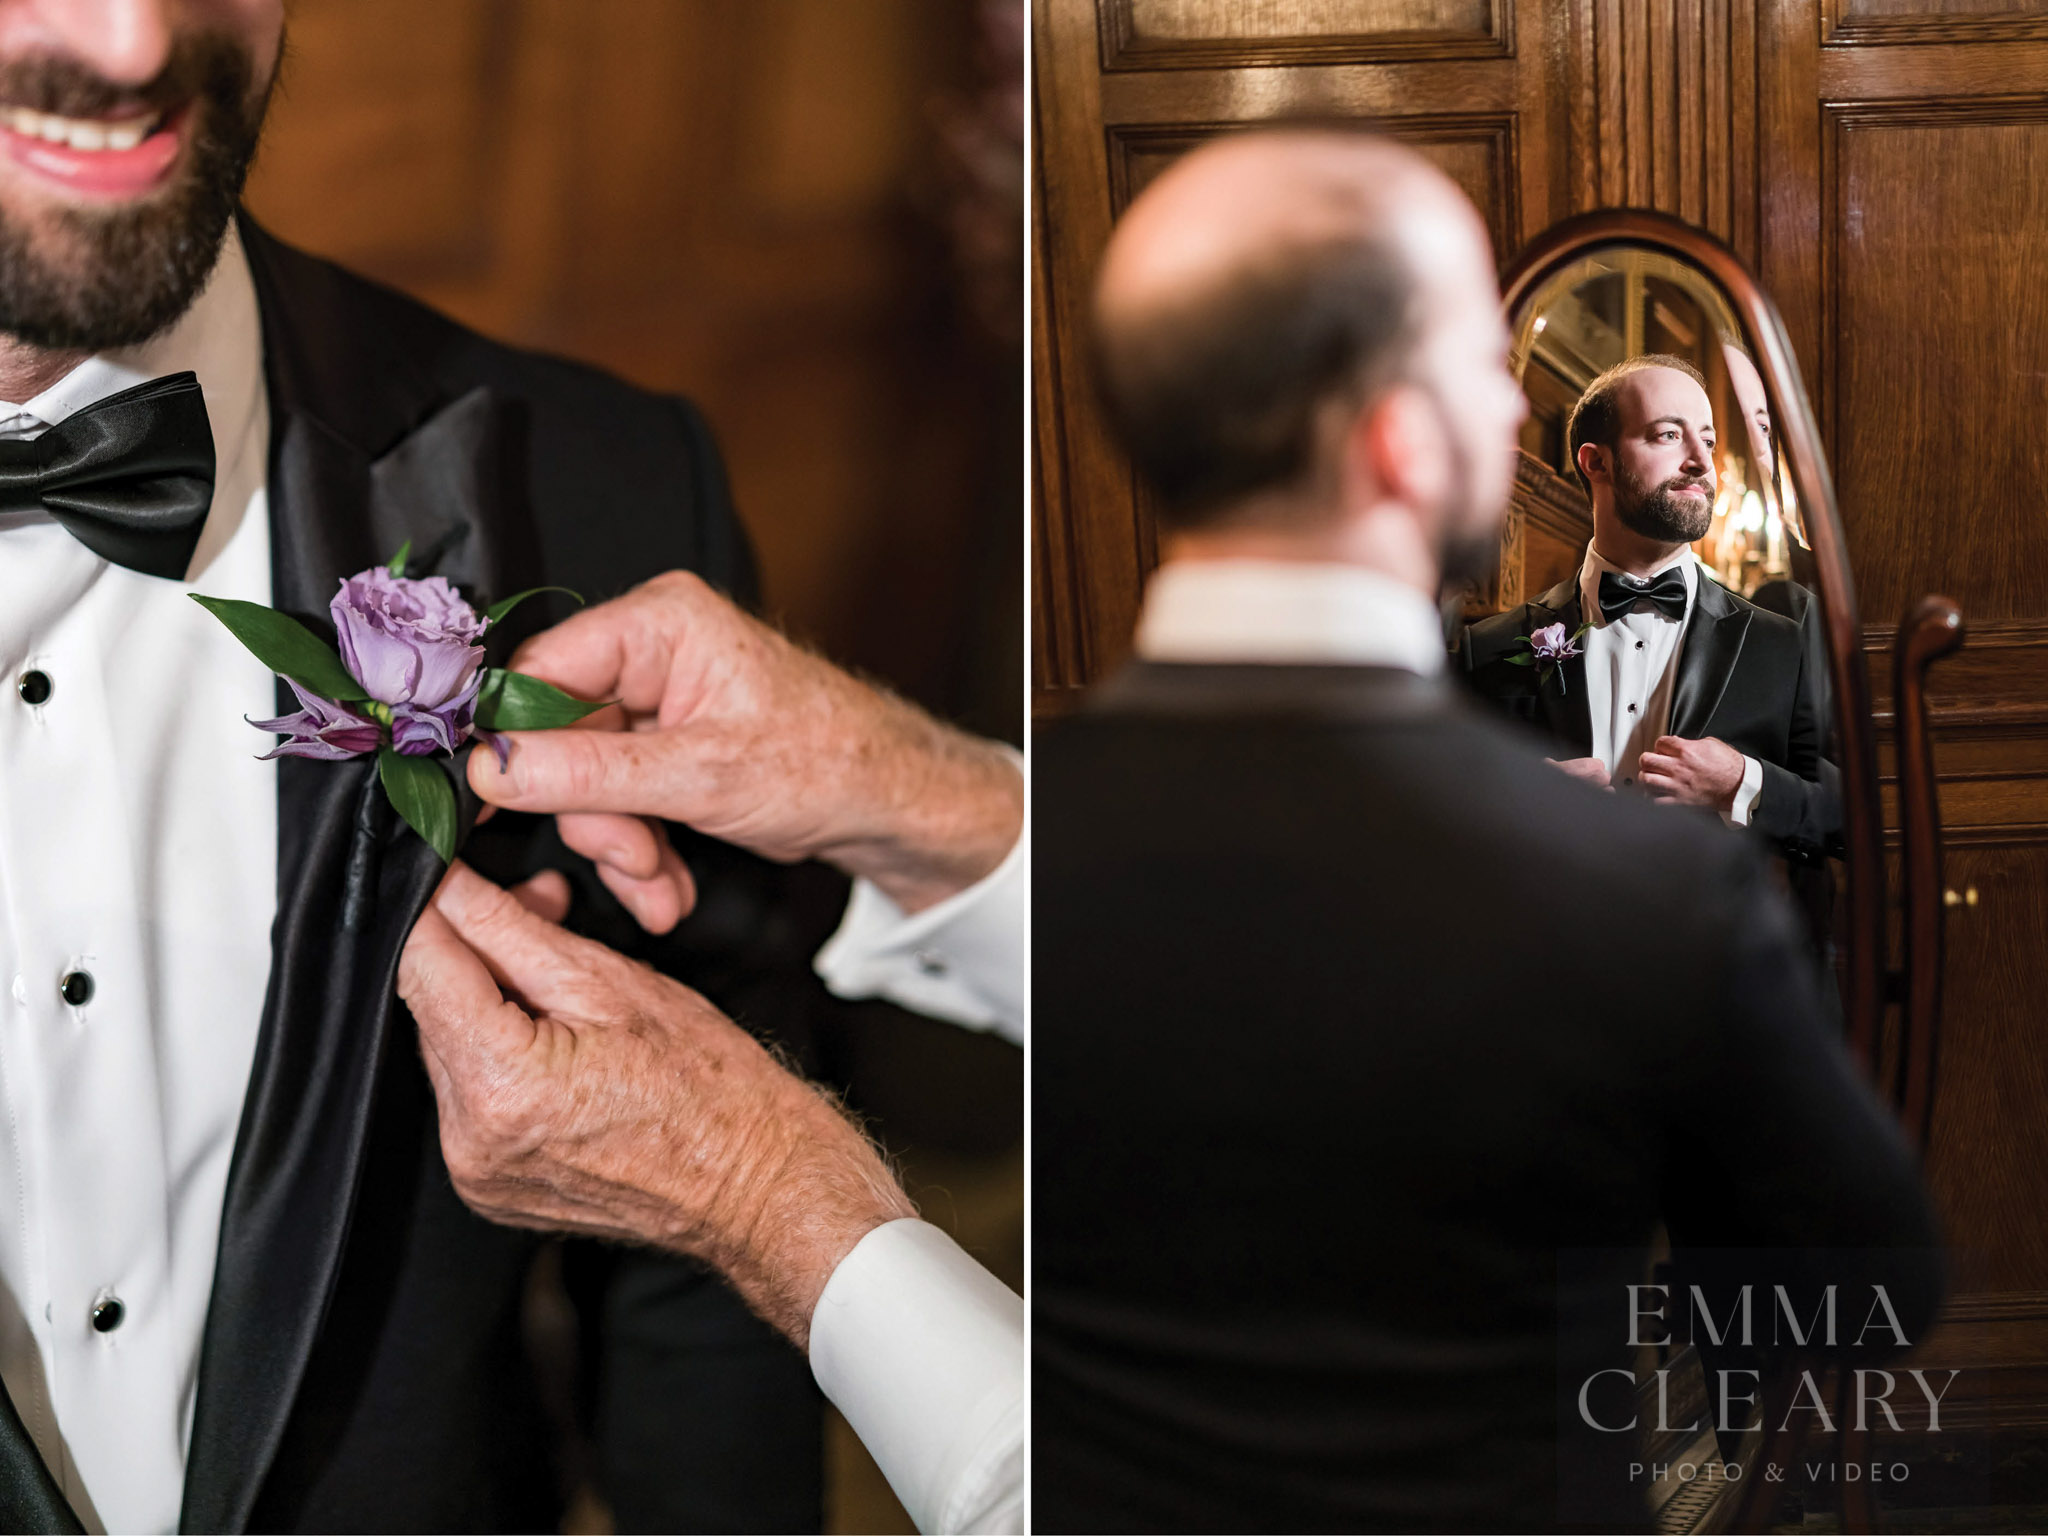 The groom and the boutonniere